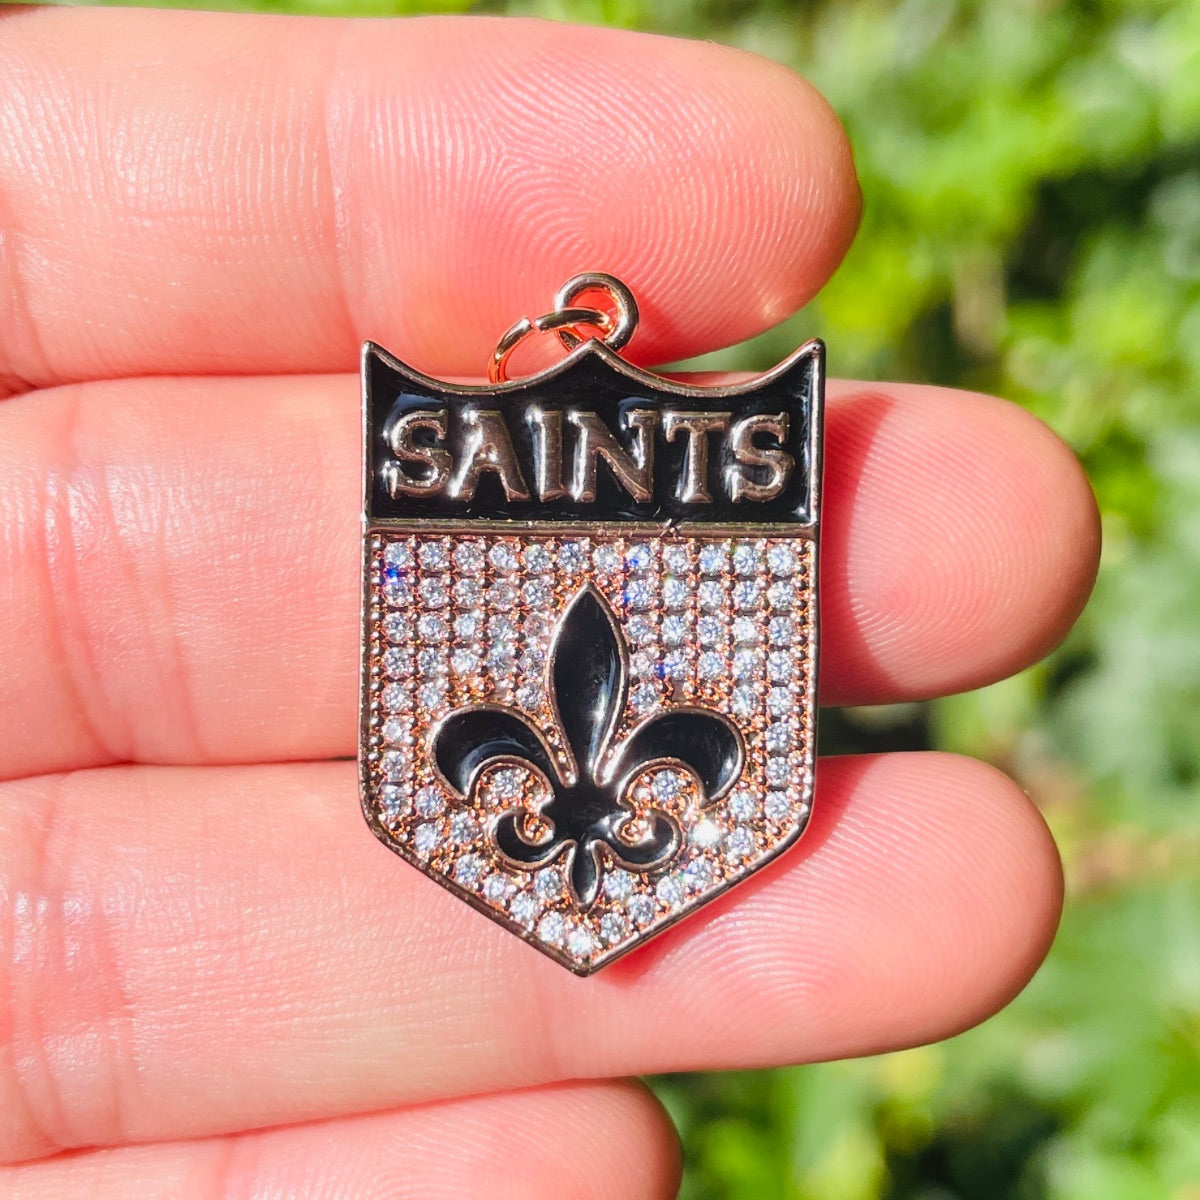 10pcs/lot 31*20mm Fleur De Lis CZ Saints Shield Charms Rose Gold CZ Paved Charms American Football Sports Louisiana Inspired New Charms Arrivals Charms Beads Beyond